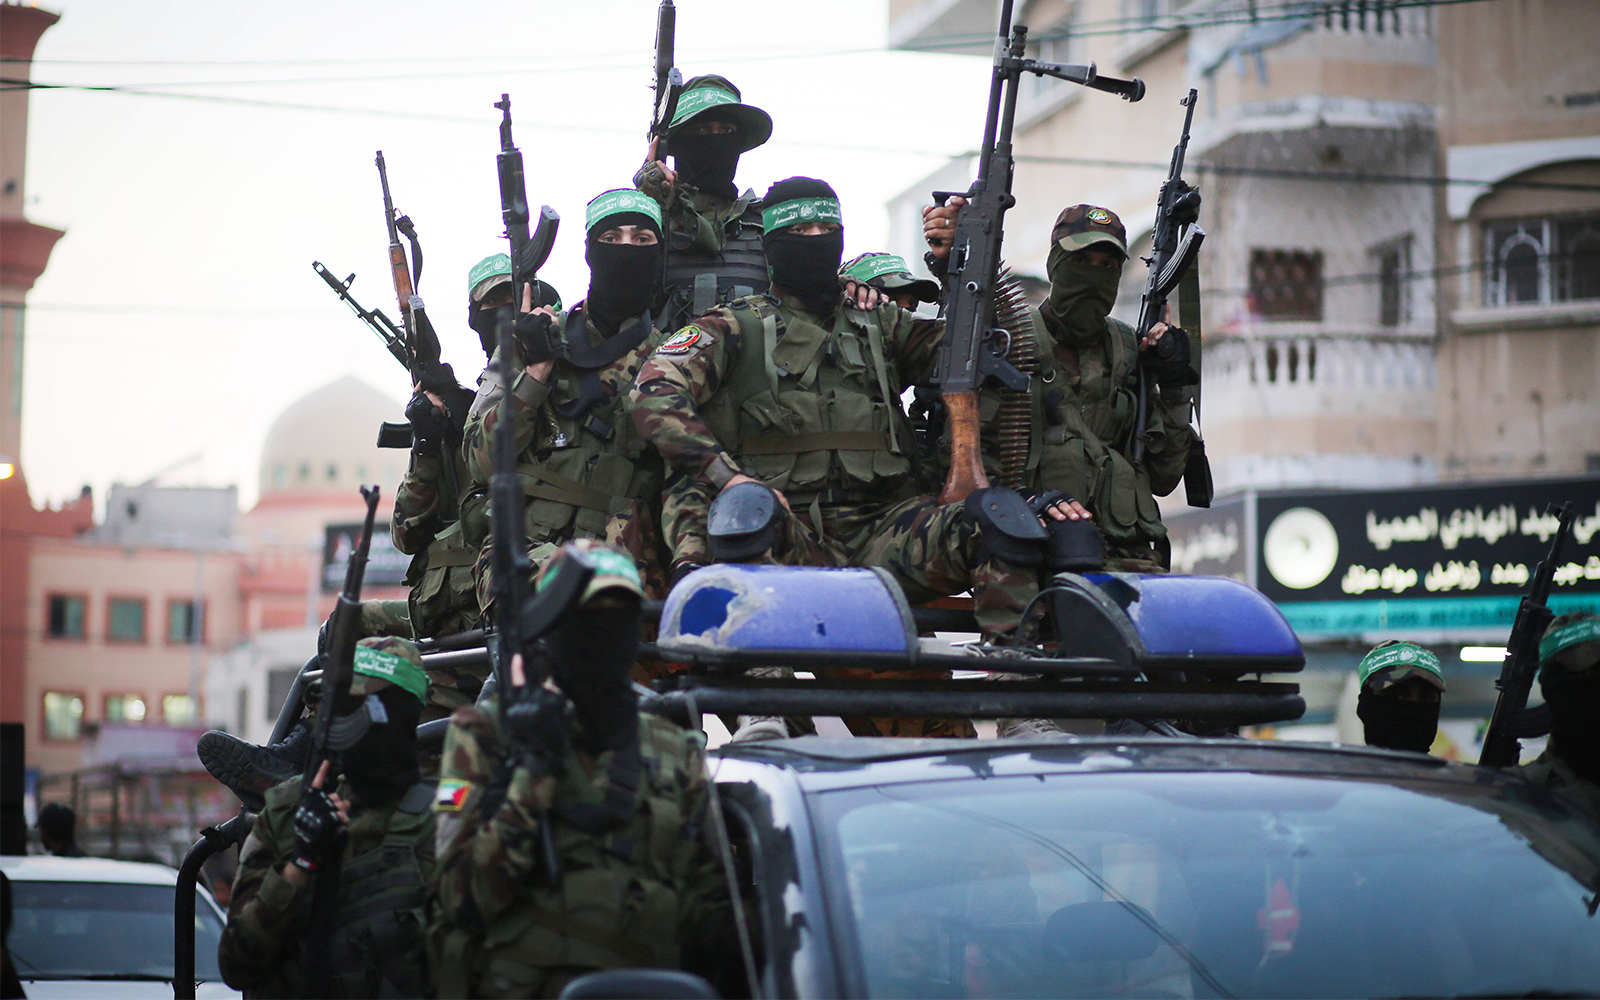 hamas-leader-vows-to-shower-israel-with-missiles-if-idf-invades-gaza